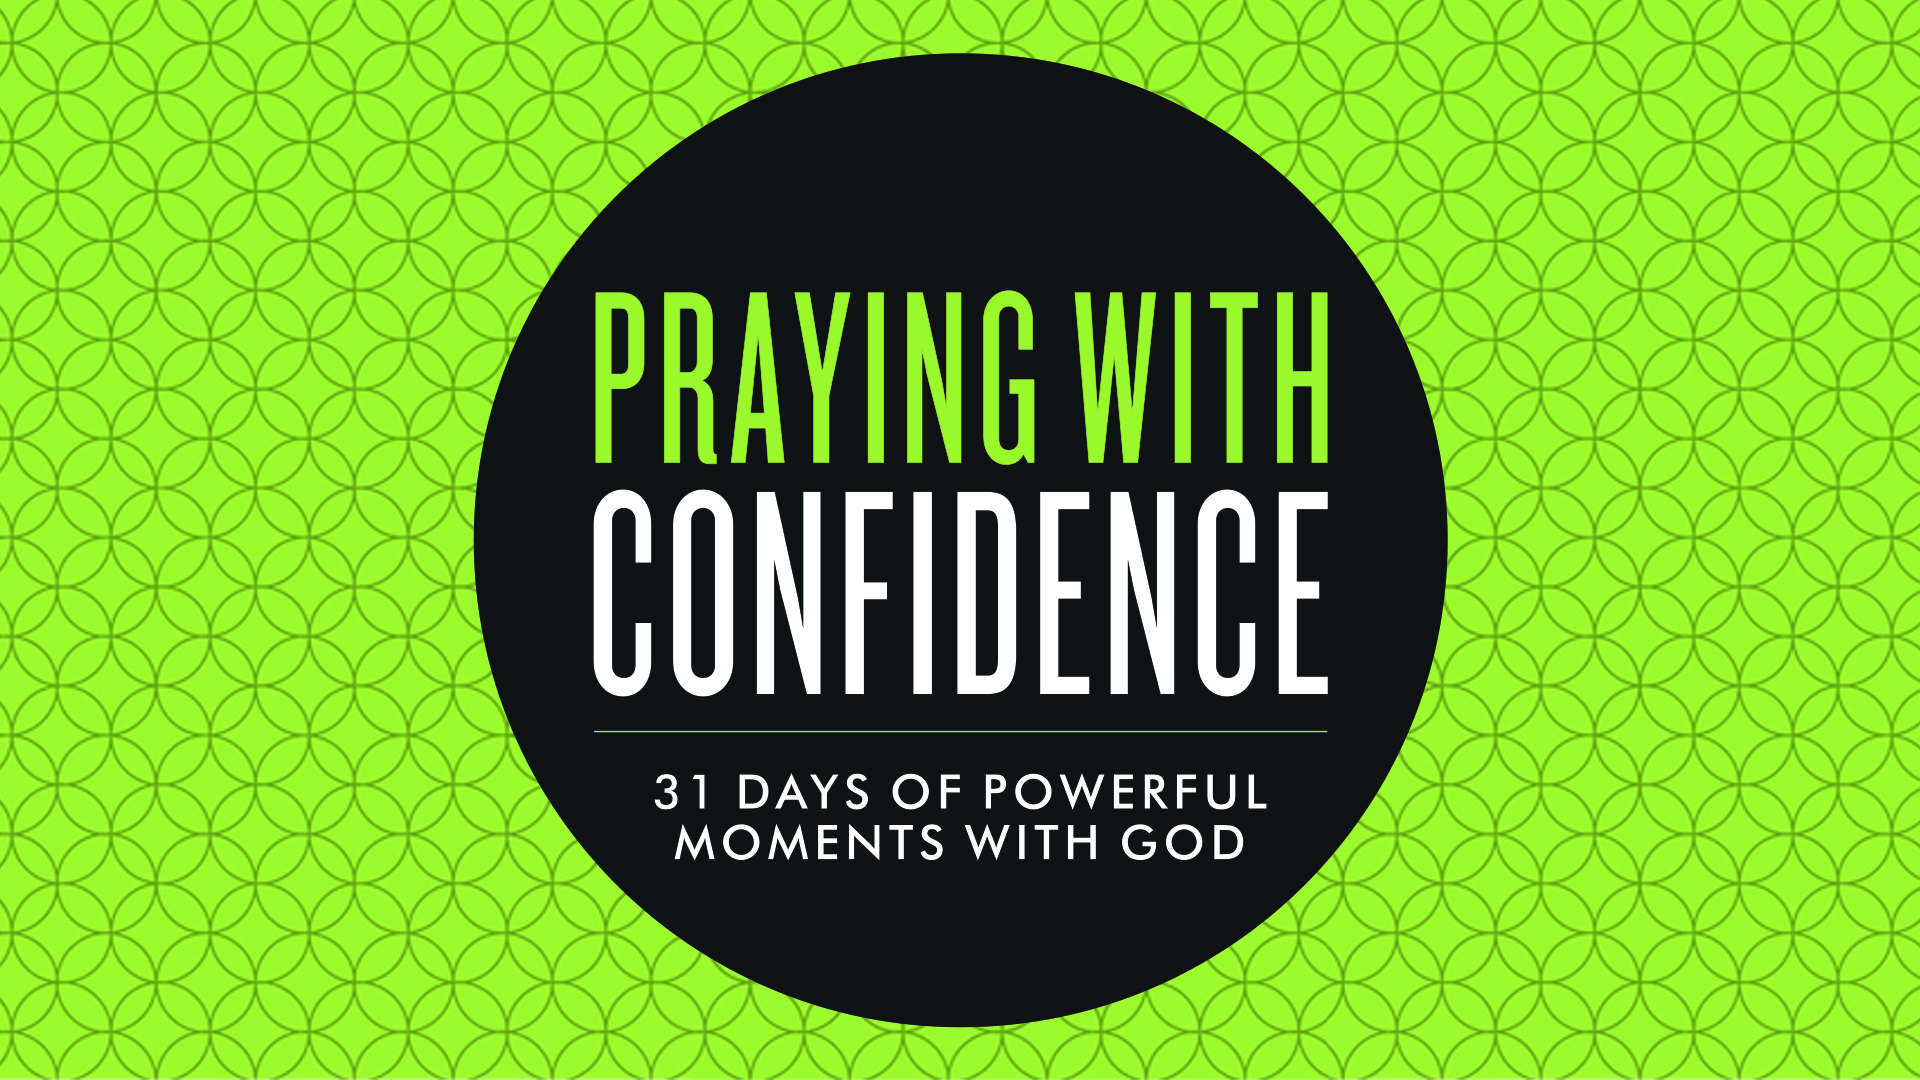 Praying with Confidence